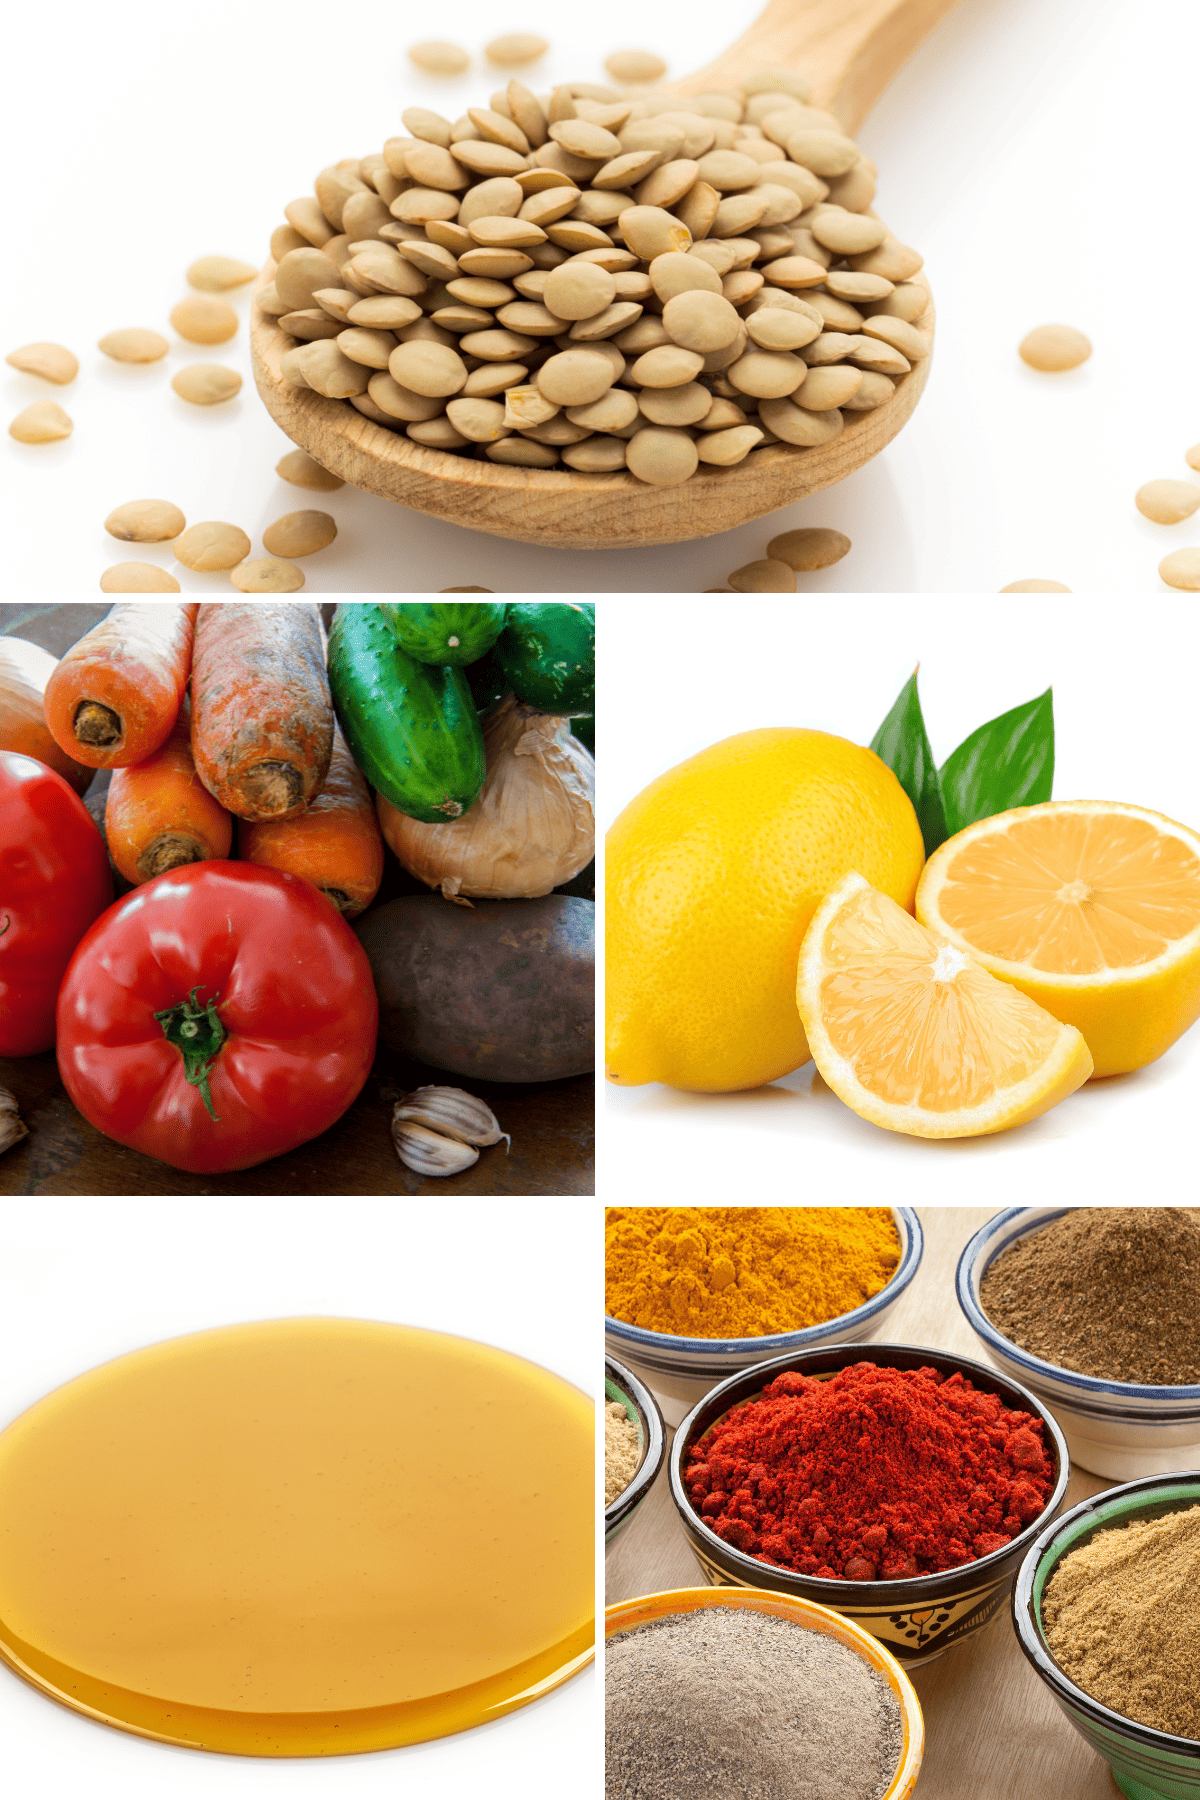 Image collage showing the recipe main ingredients.